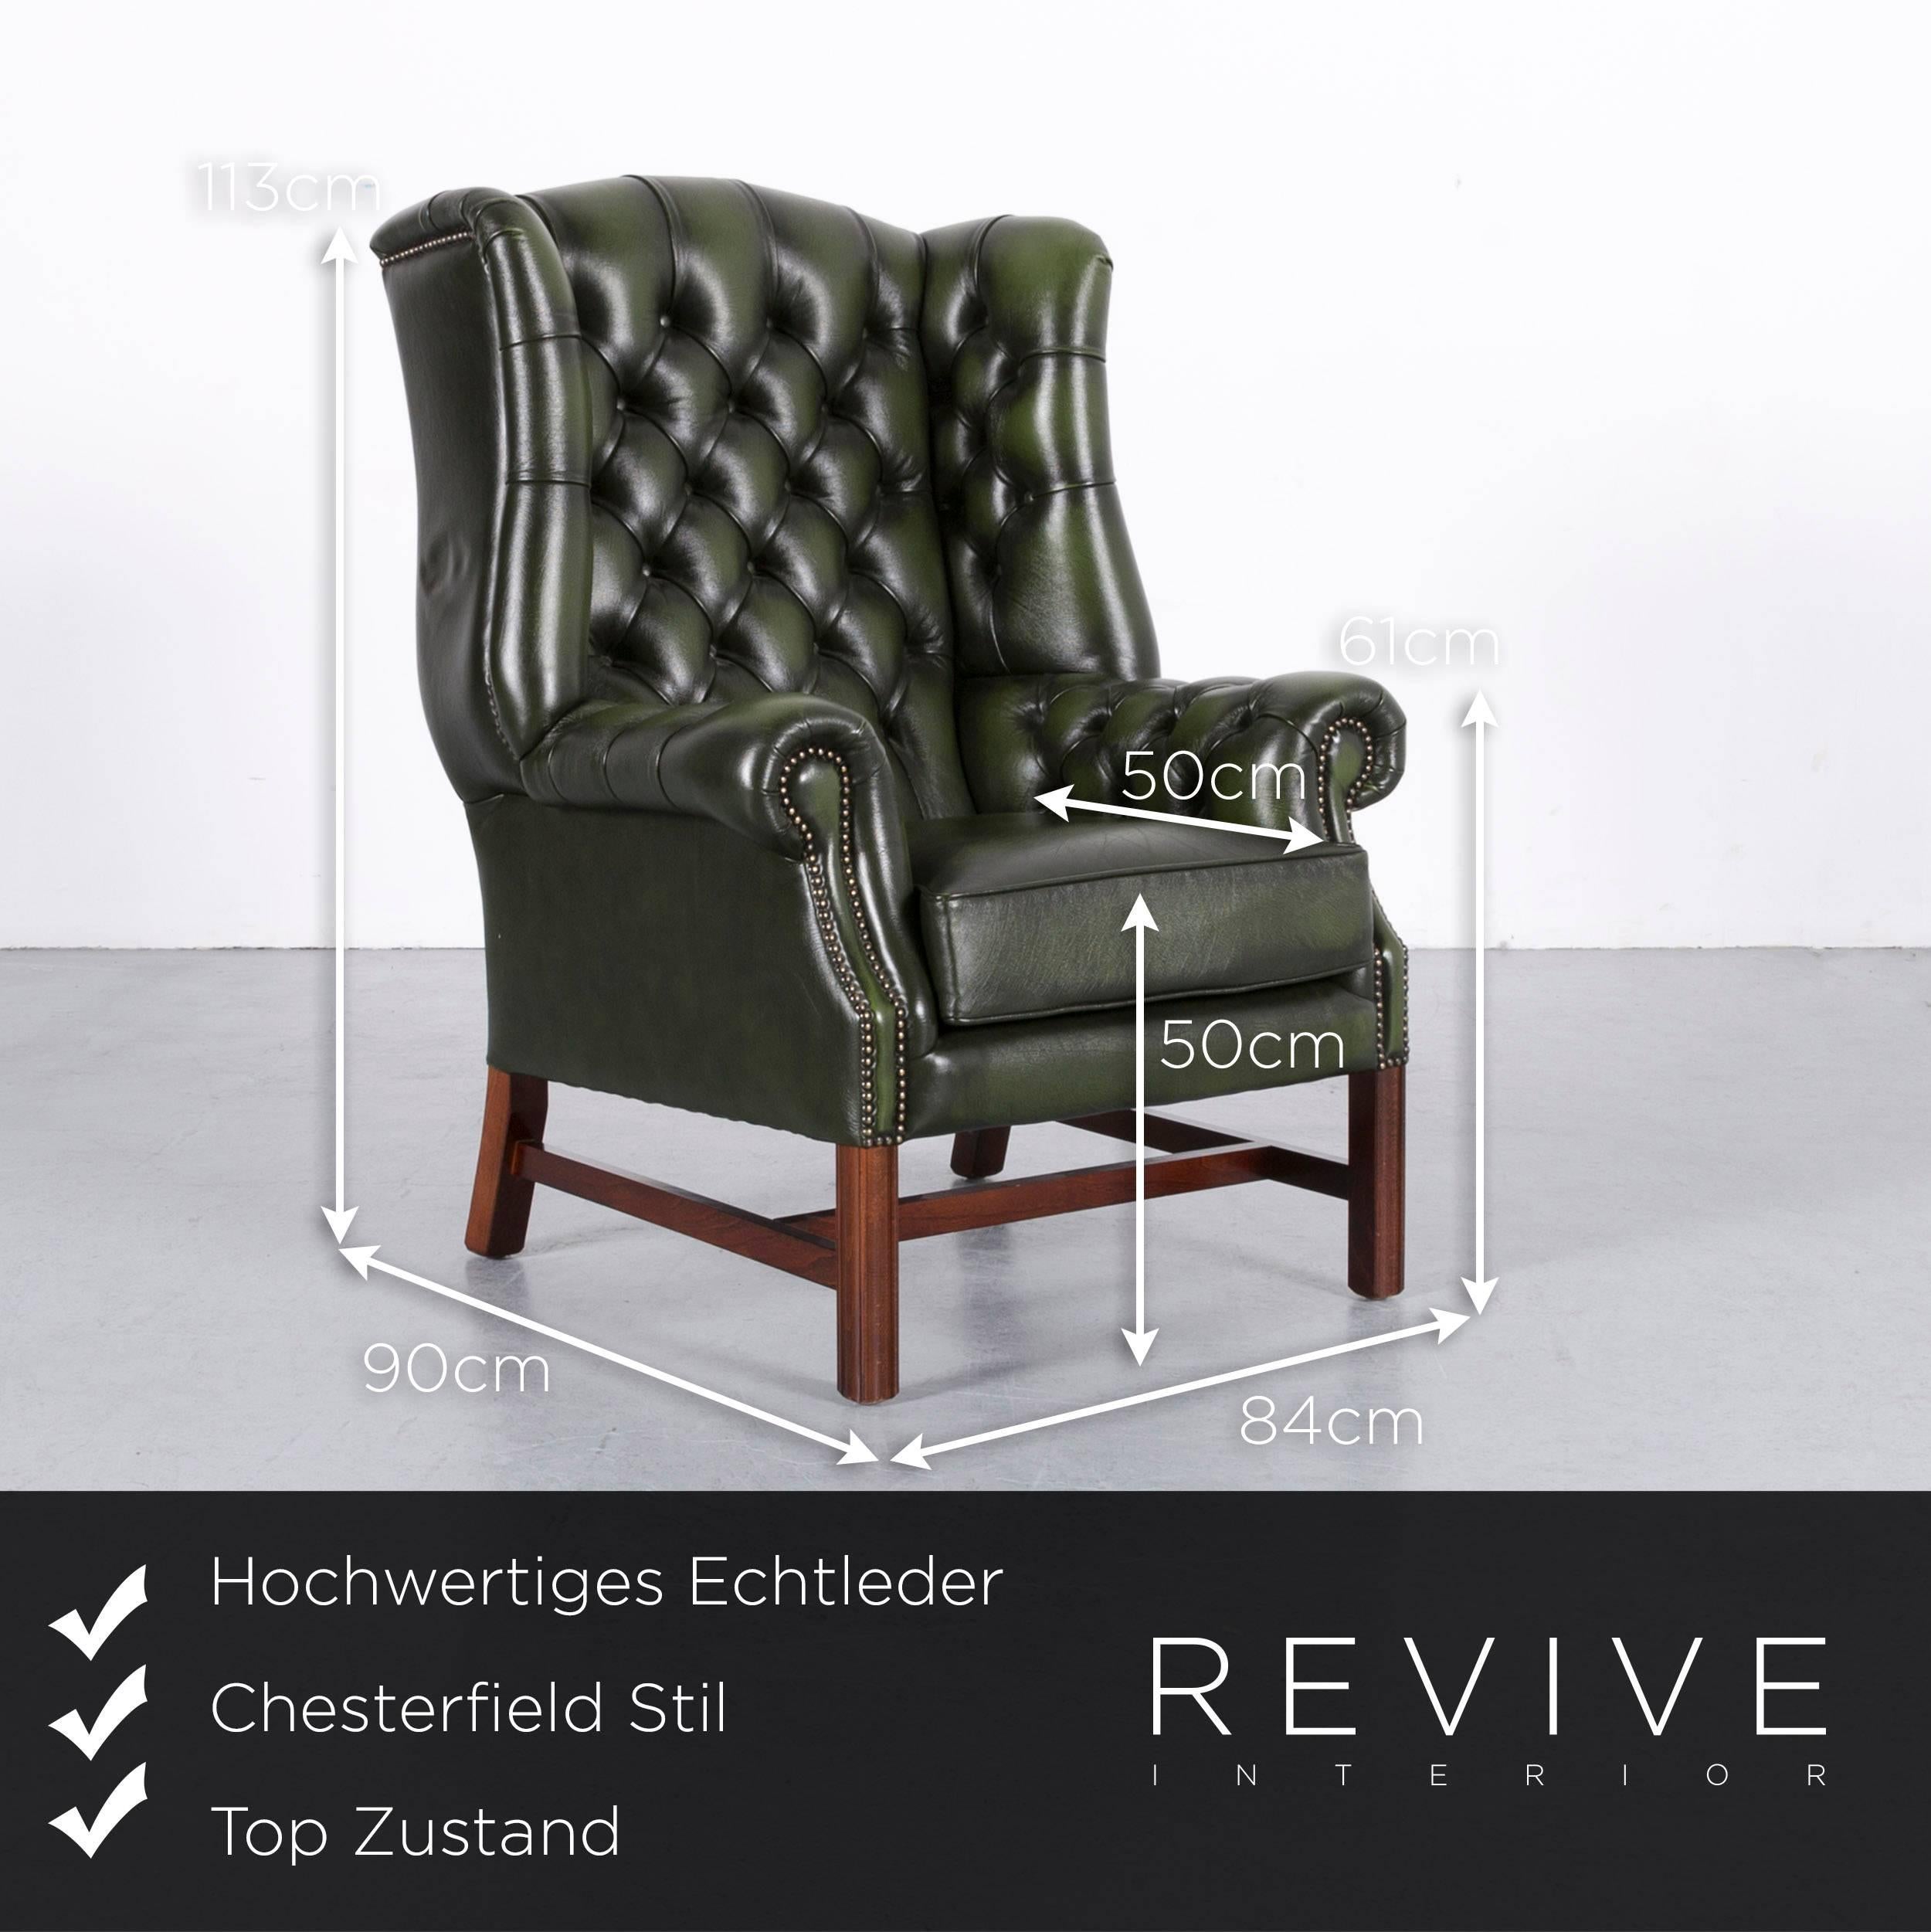 We bring to you an Chesterfield leather armchair wingback green one-seat.





























































